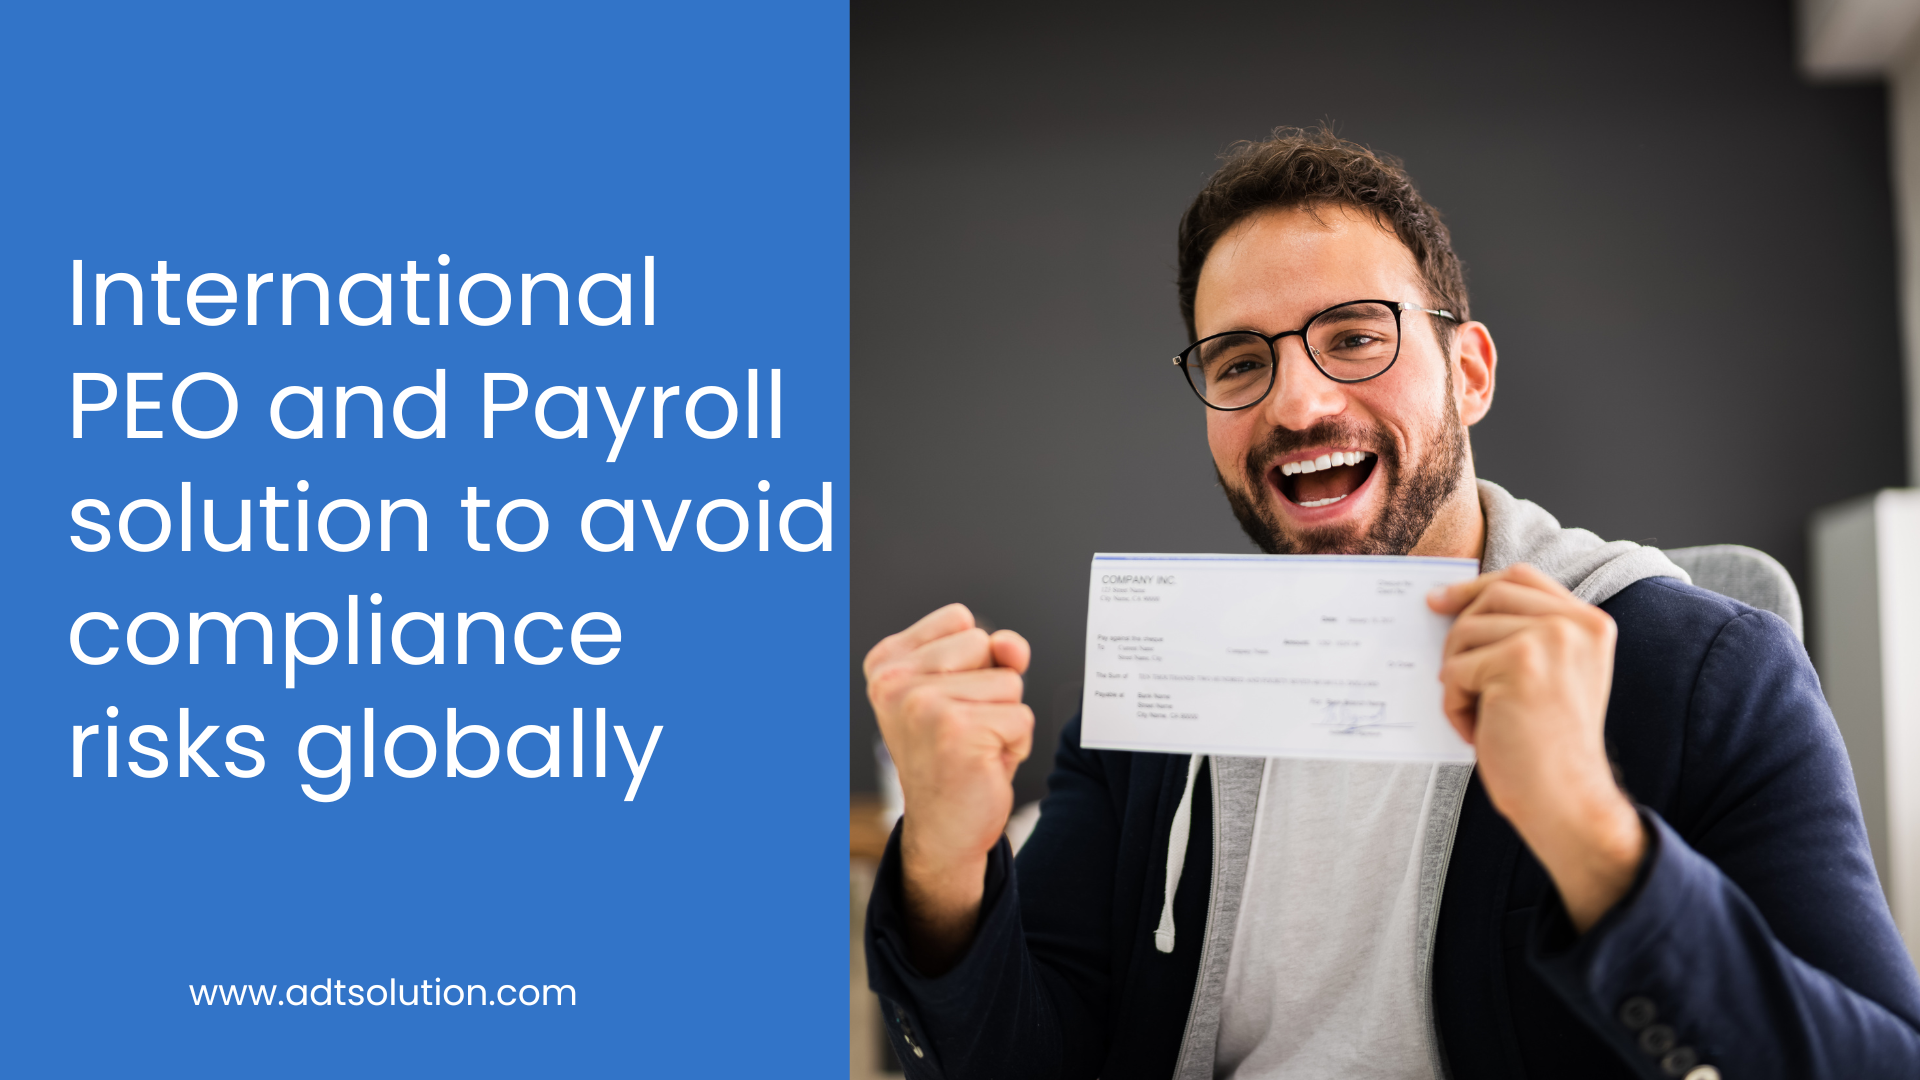 International PEO and Payroll solution to avoid compliance risks globally